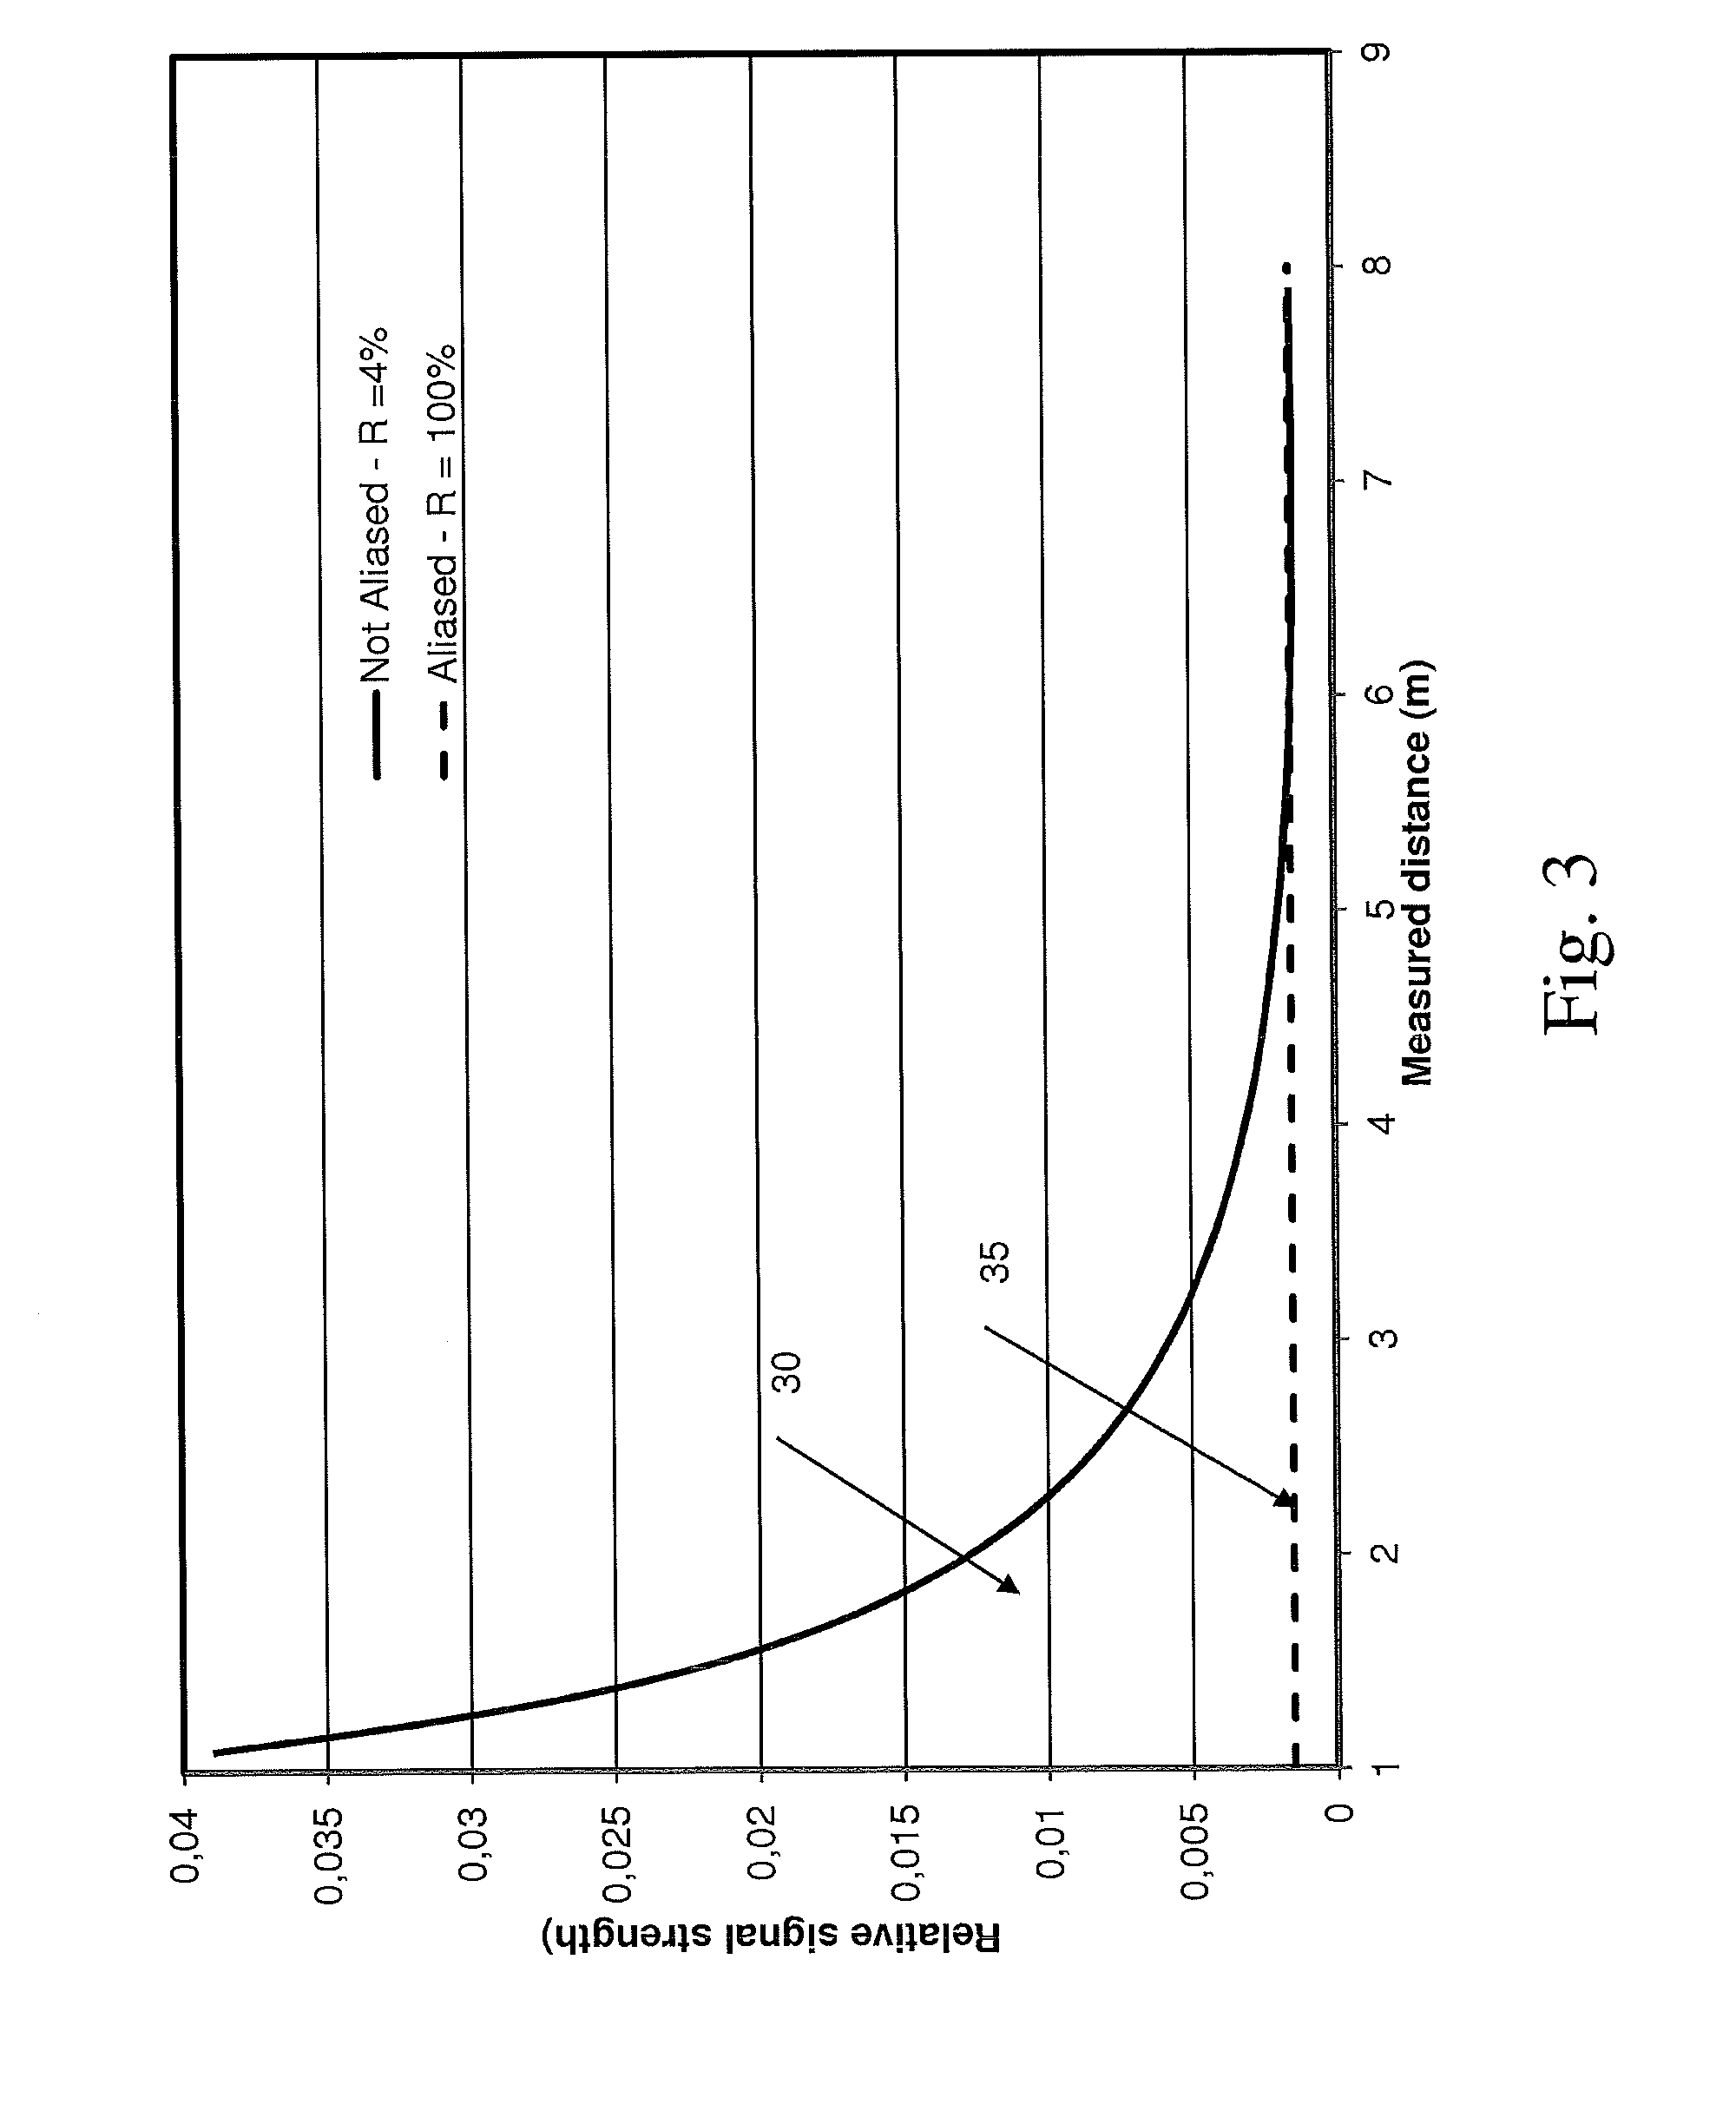 Processing of time-of-flight signals